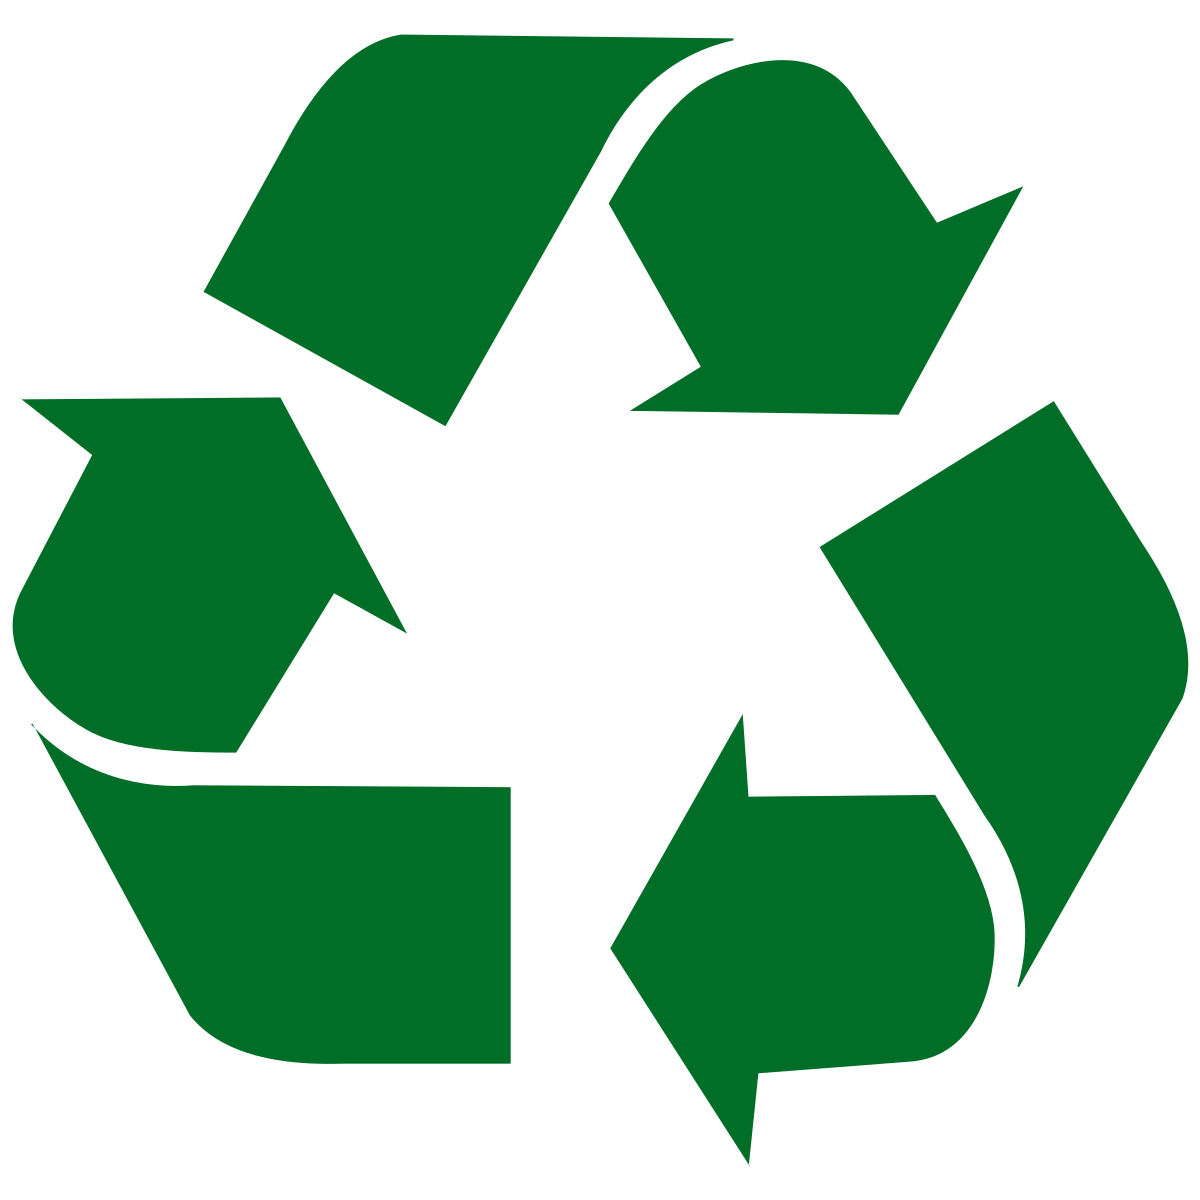 Recycle Bin Symbol Recycling Free HQ Image PNG Image